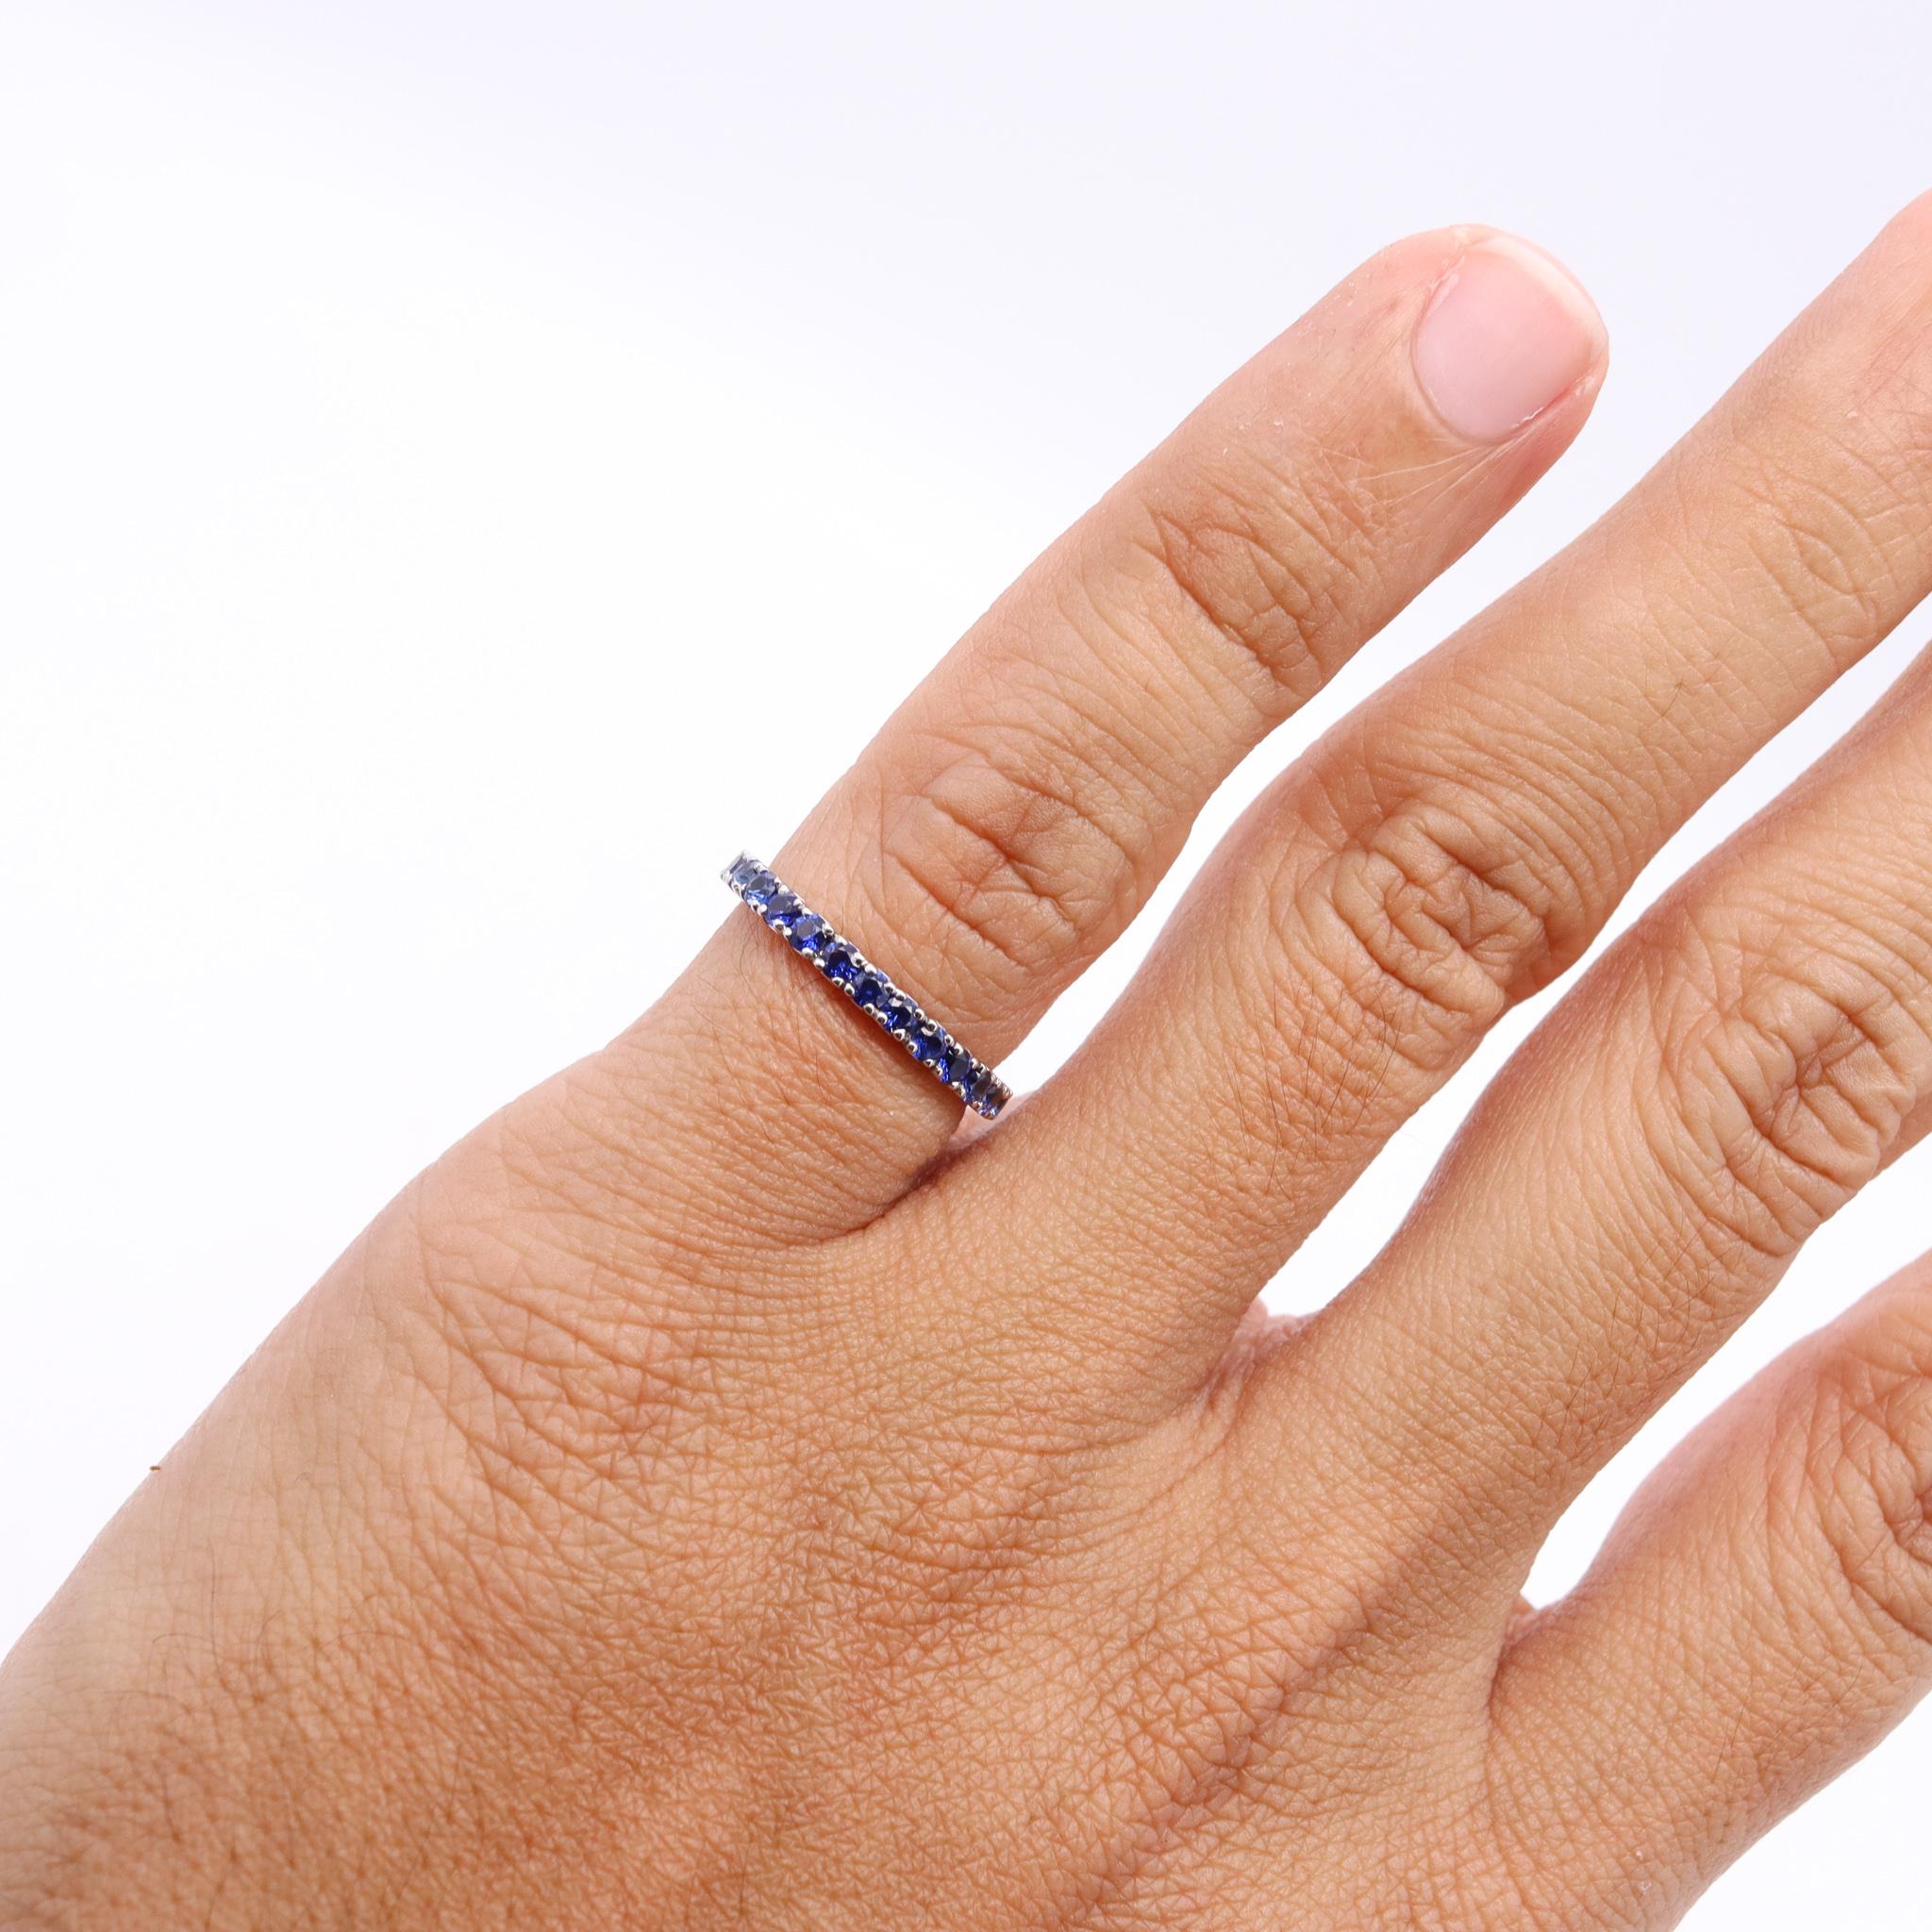 Women's Eternity Ring Band in 18kt White Gold with 1.35 Cts in Ceylon Blue Sapphires